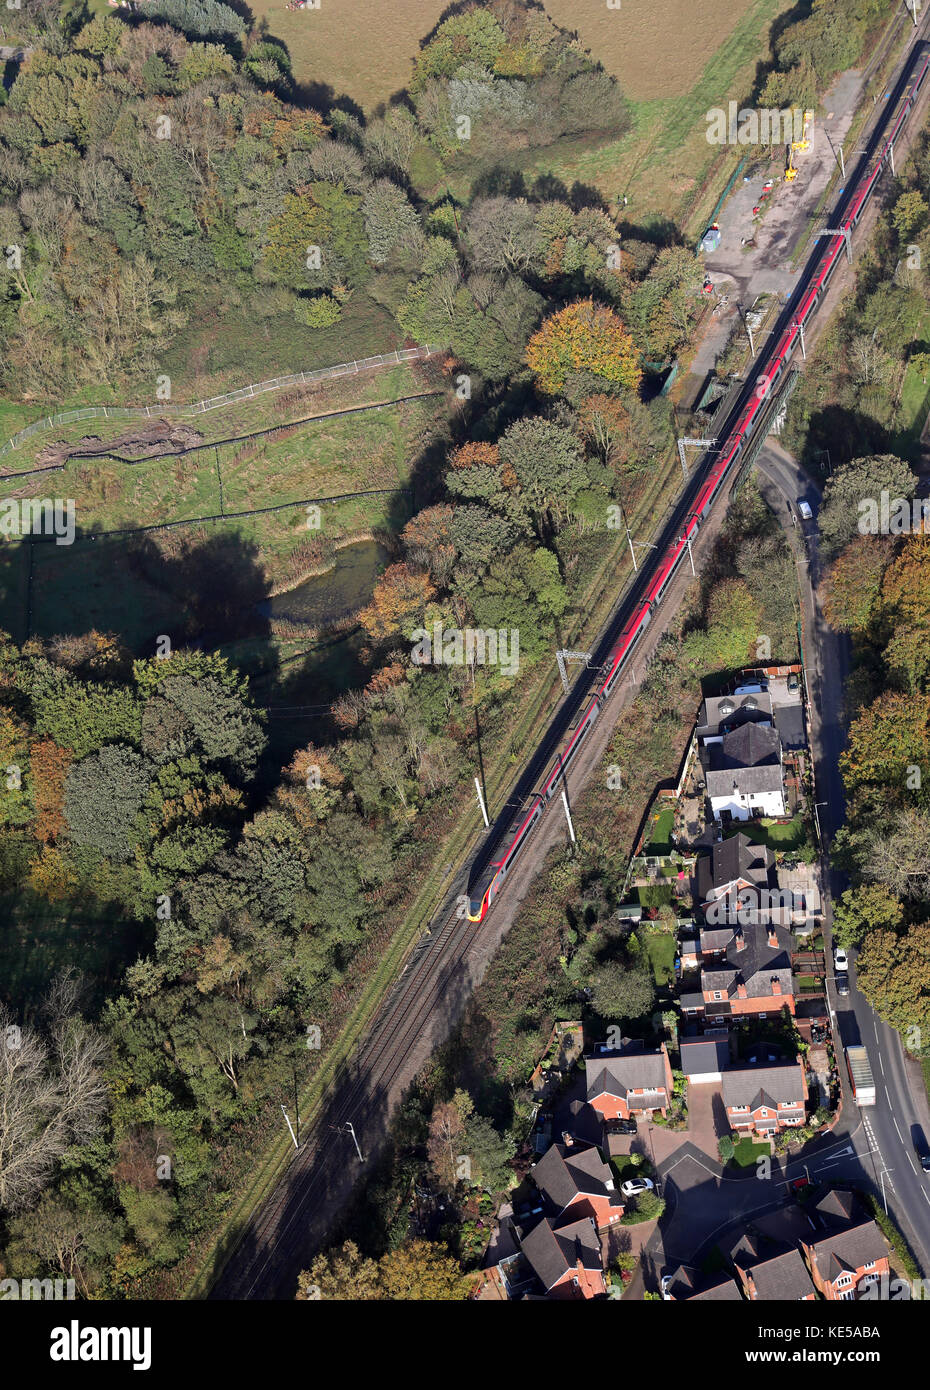 aerial view of a Virgin Trains InterCity train on the West Coast line, England, UK Stock Photo